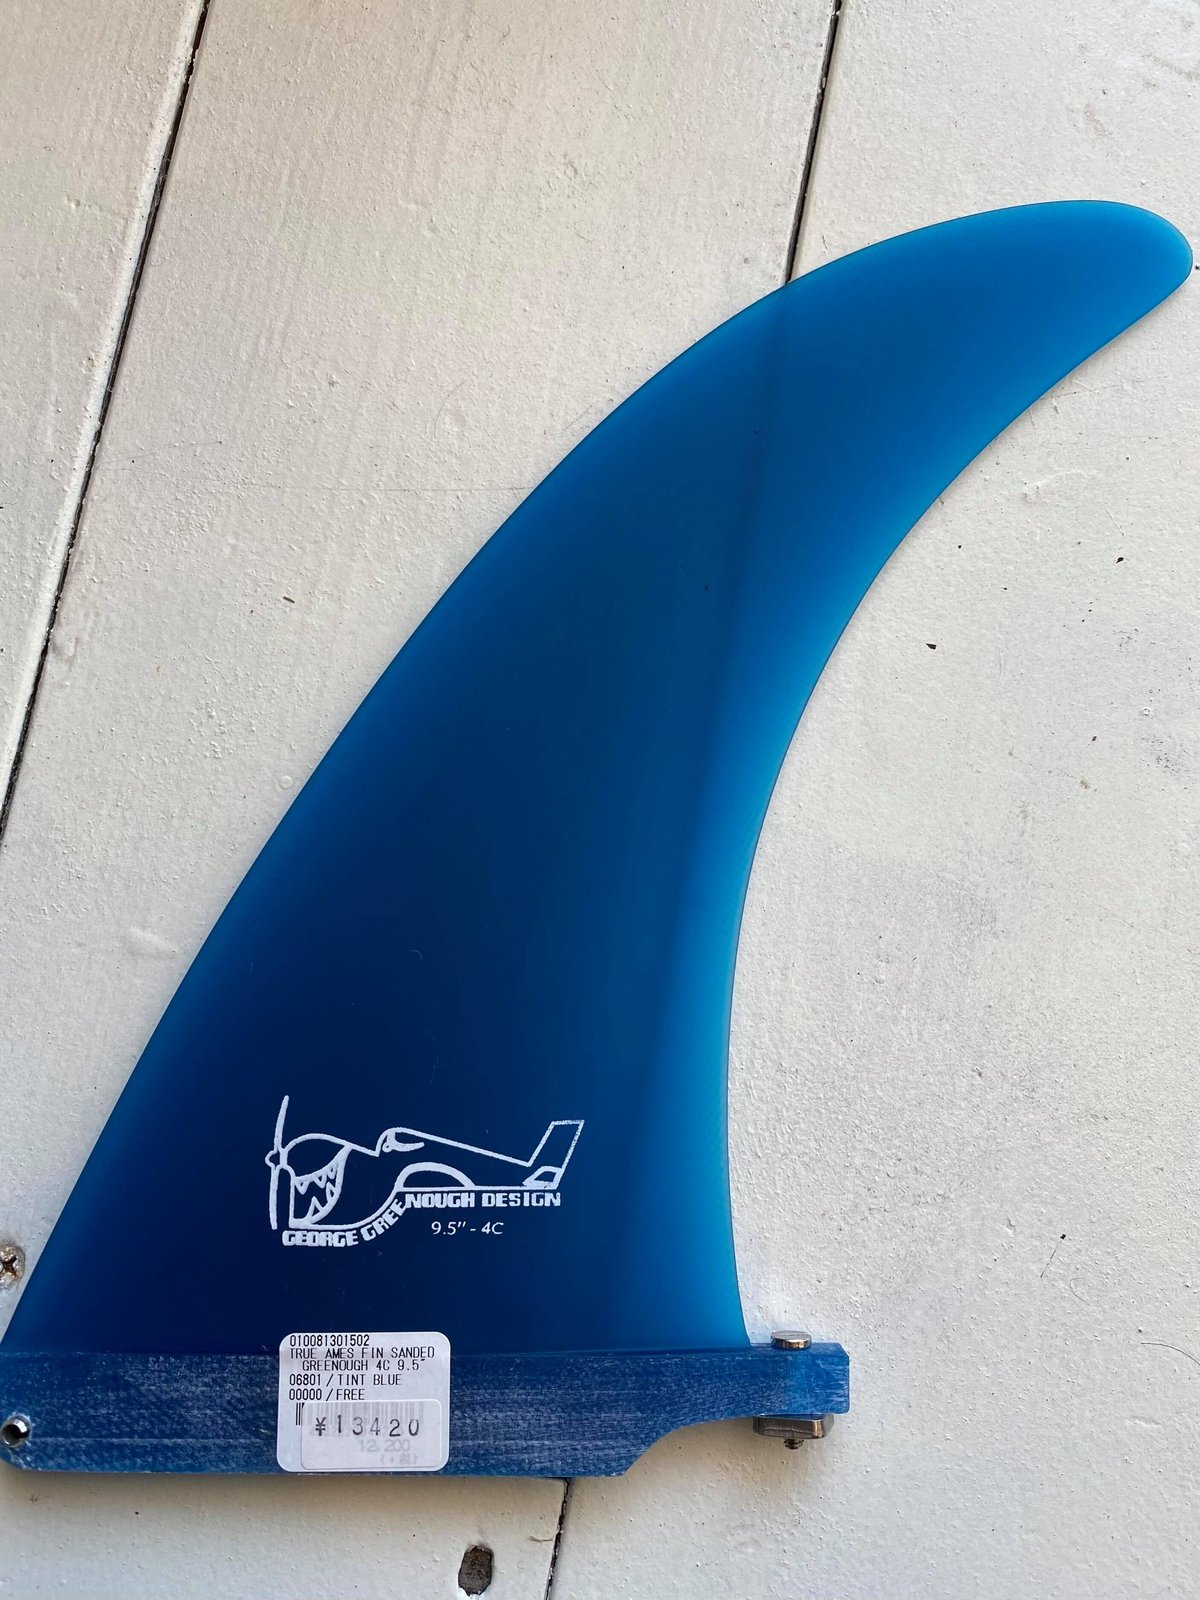 Greenough 4-C Surf Fin by True Ame/9.5